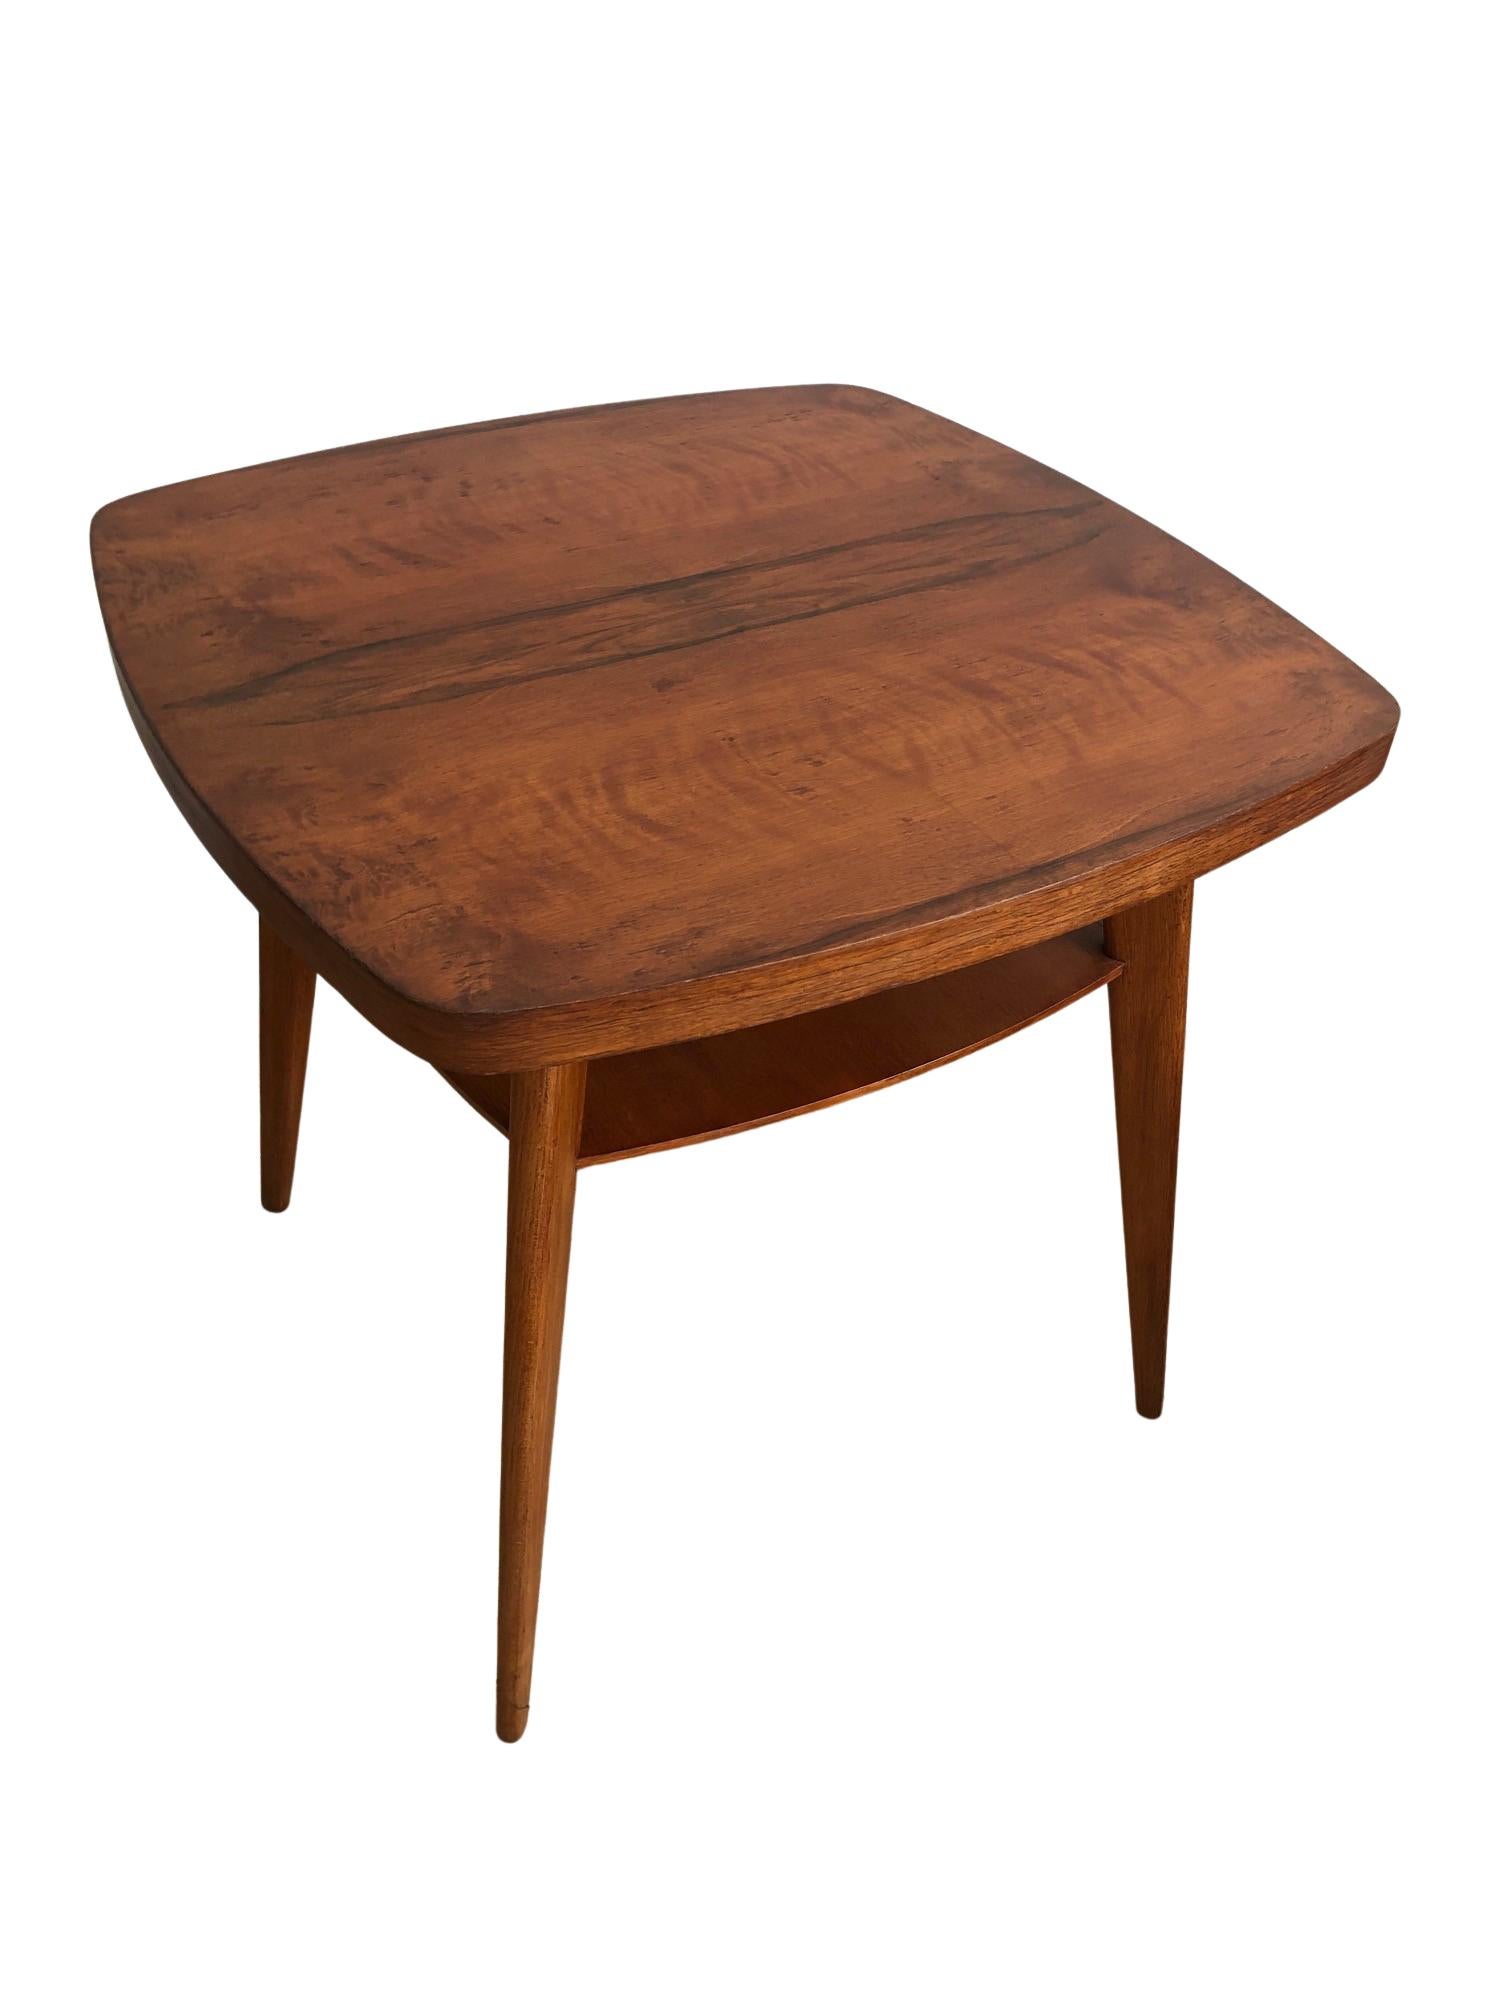 Mid-Century Modern Mid-Century Wooden Coffee Table, Europe, 1960s For Sale